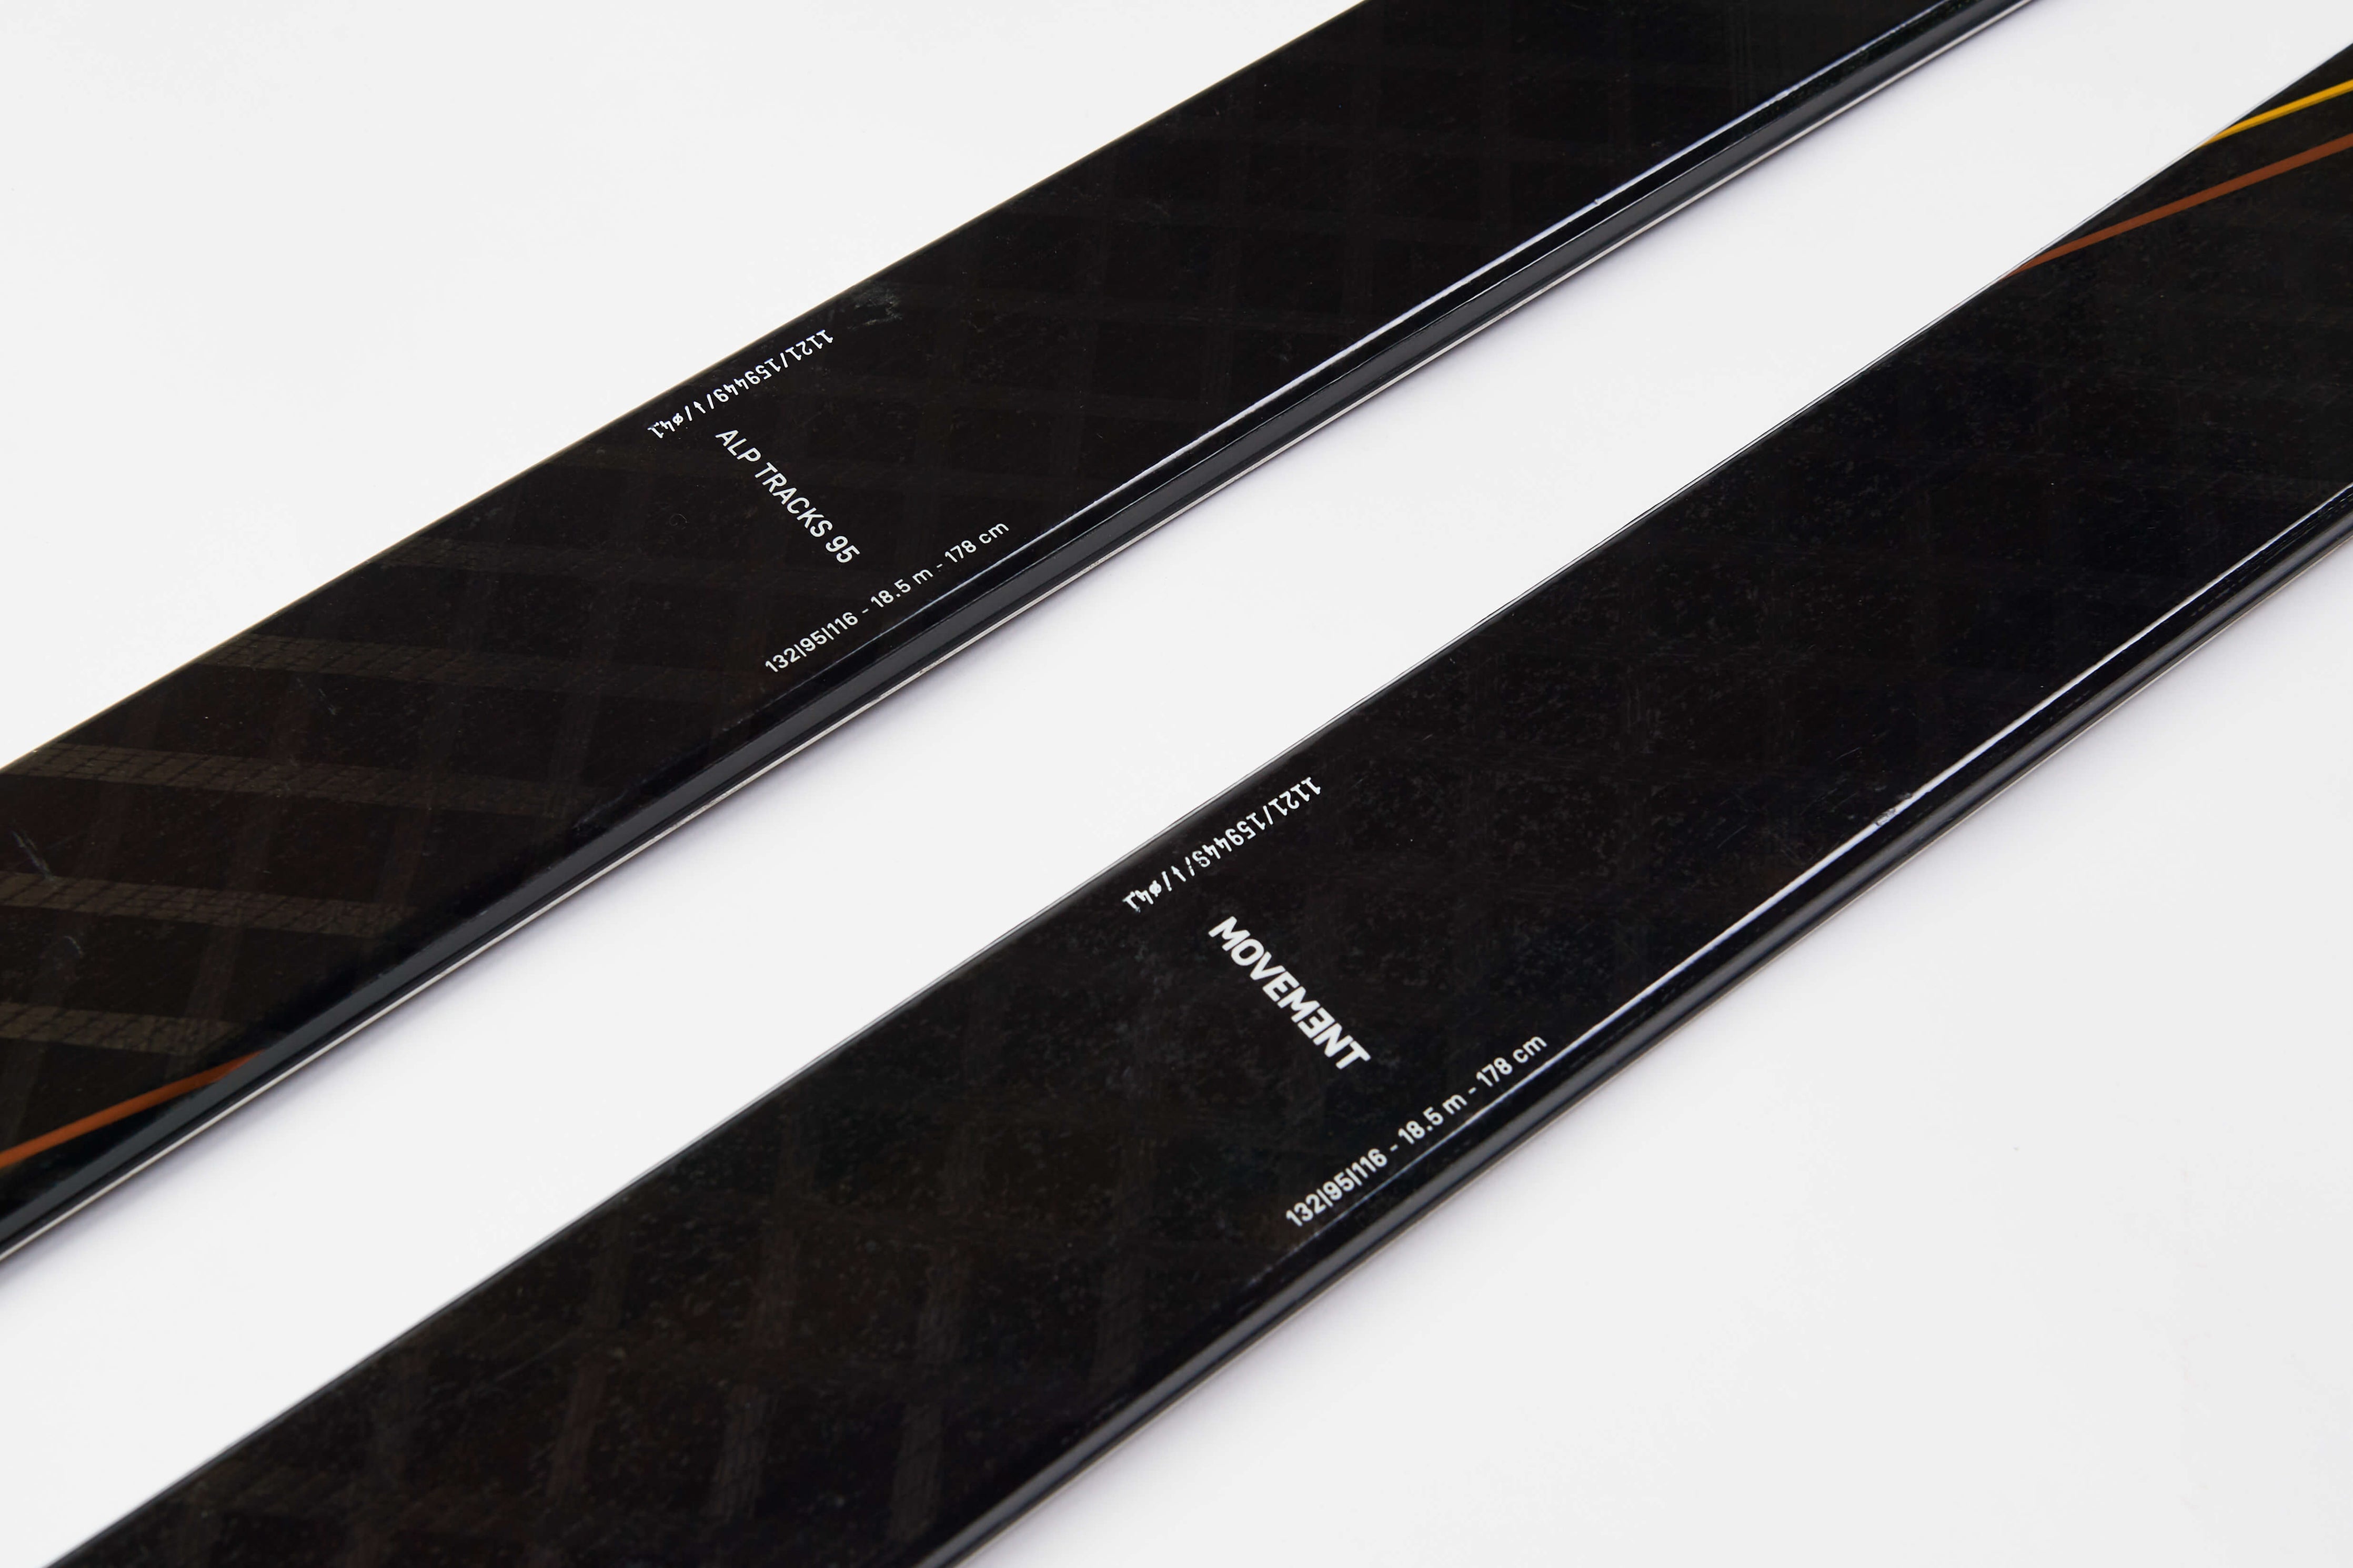 Conquer backcountry terrain alongside Movement's Alp Tracks 95 touring skis.